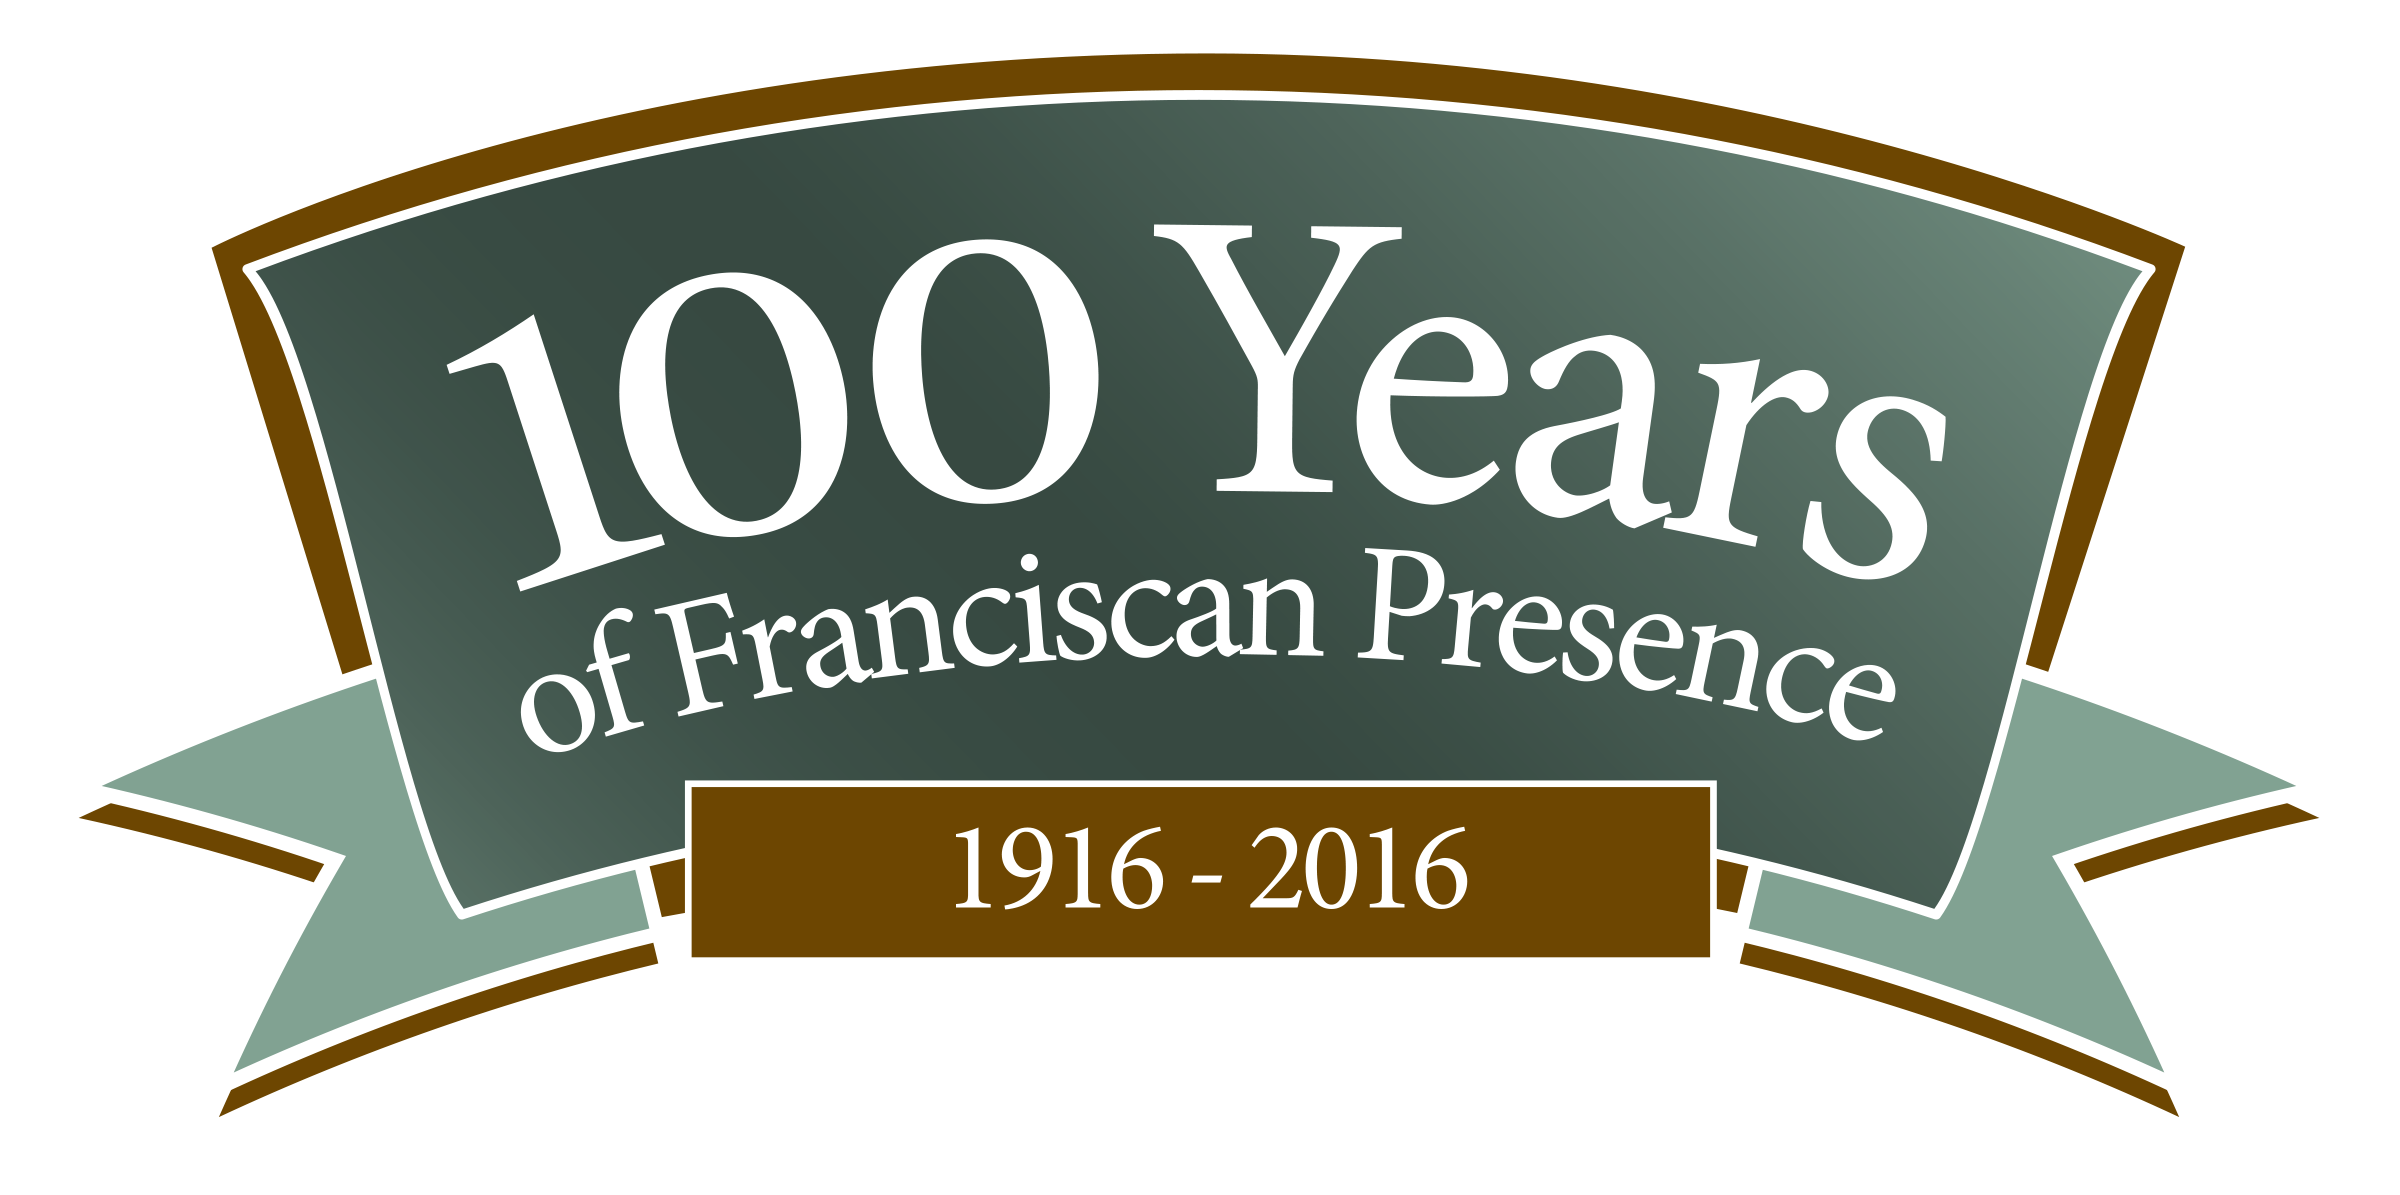 Join Us Throughout the Year as We Celebrate Our Centennial